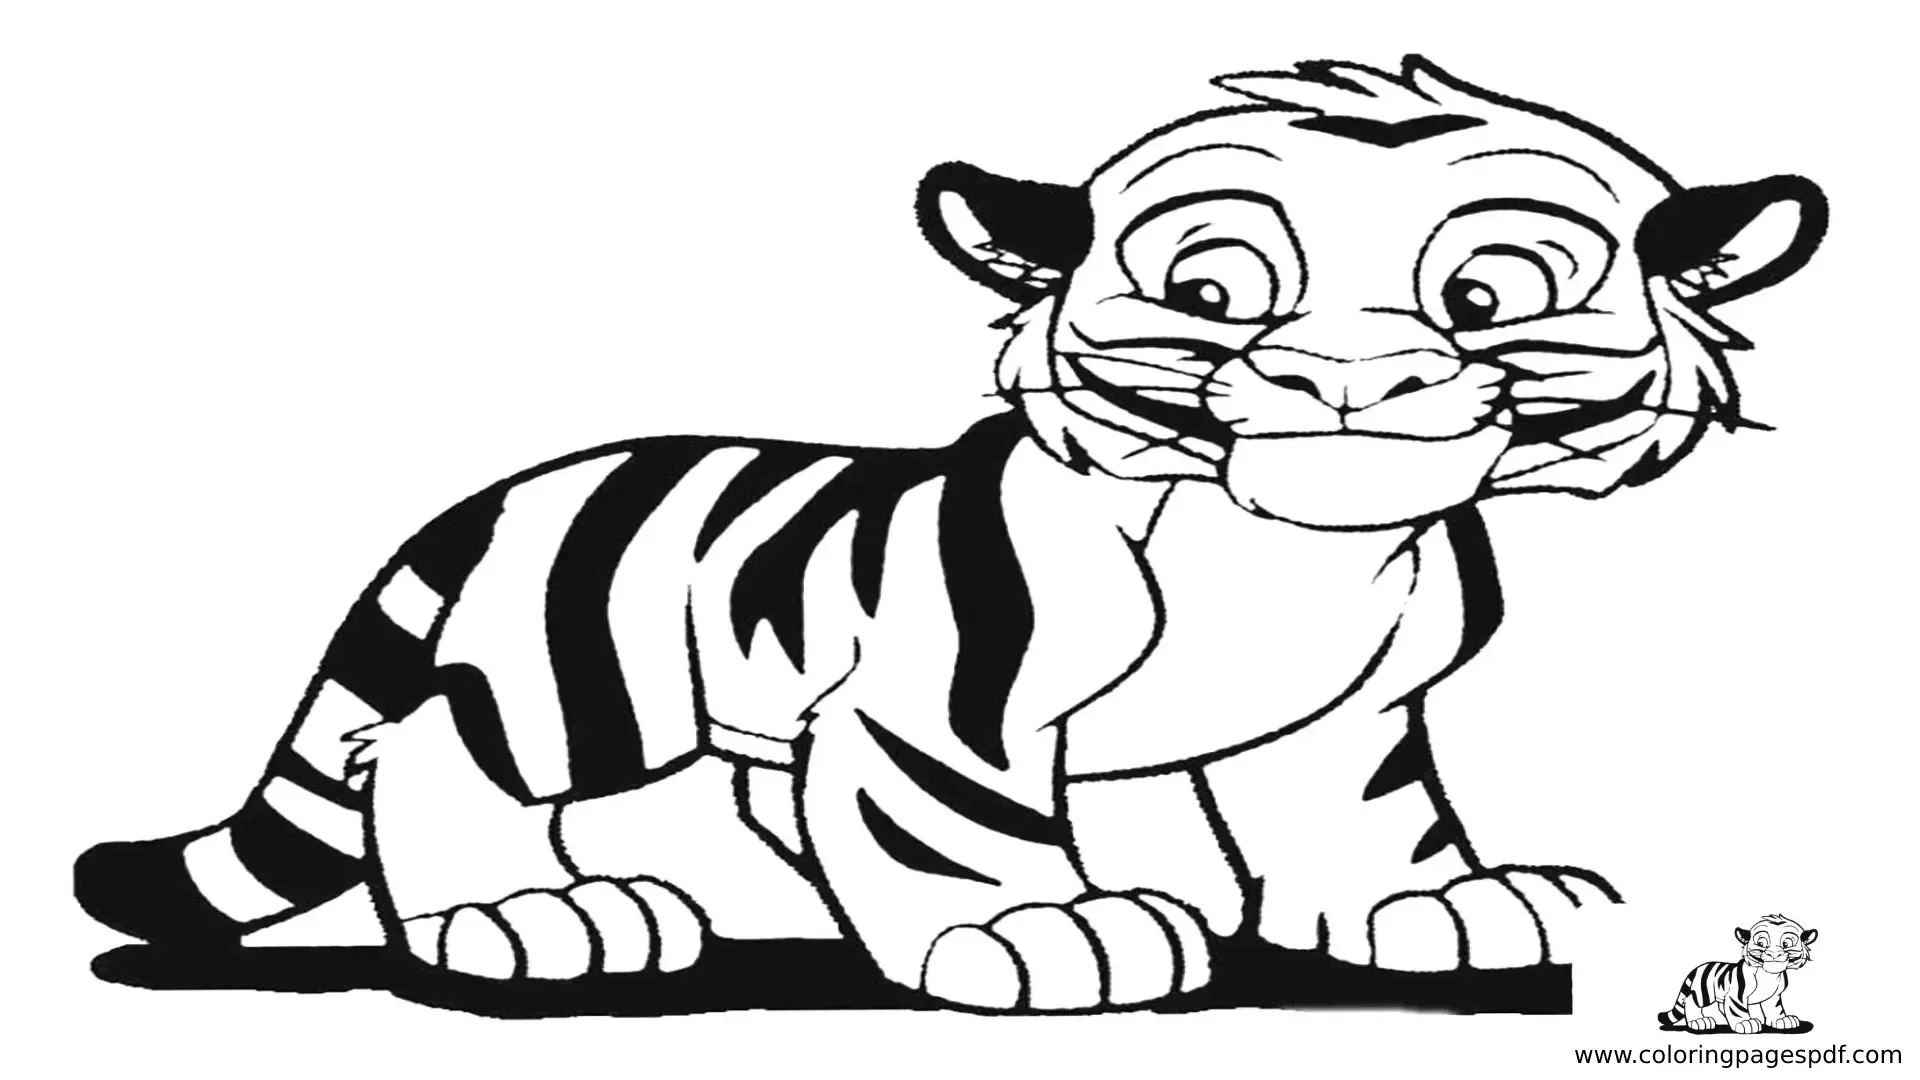 Coloring Pages Of A Cartoon Tiger